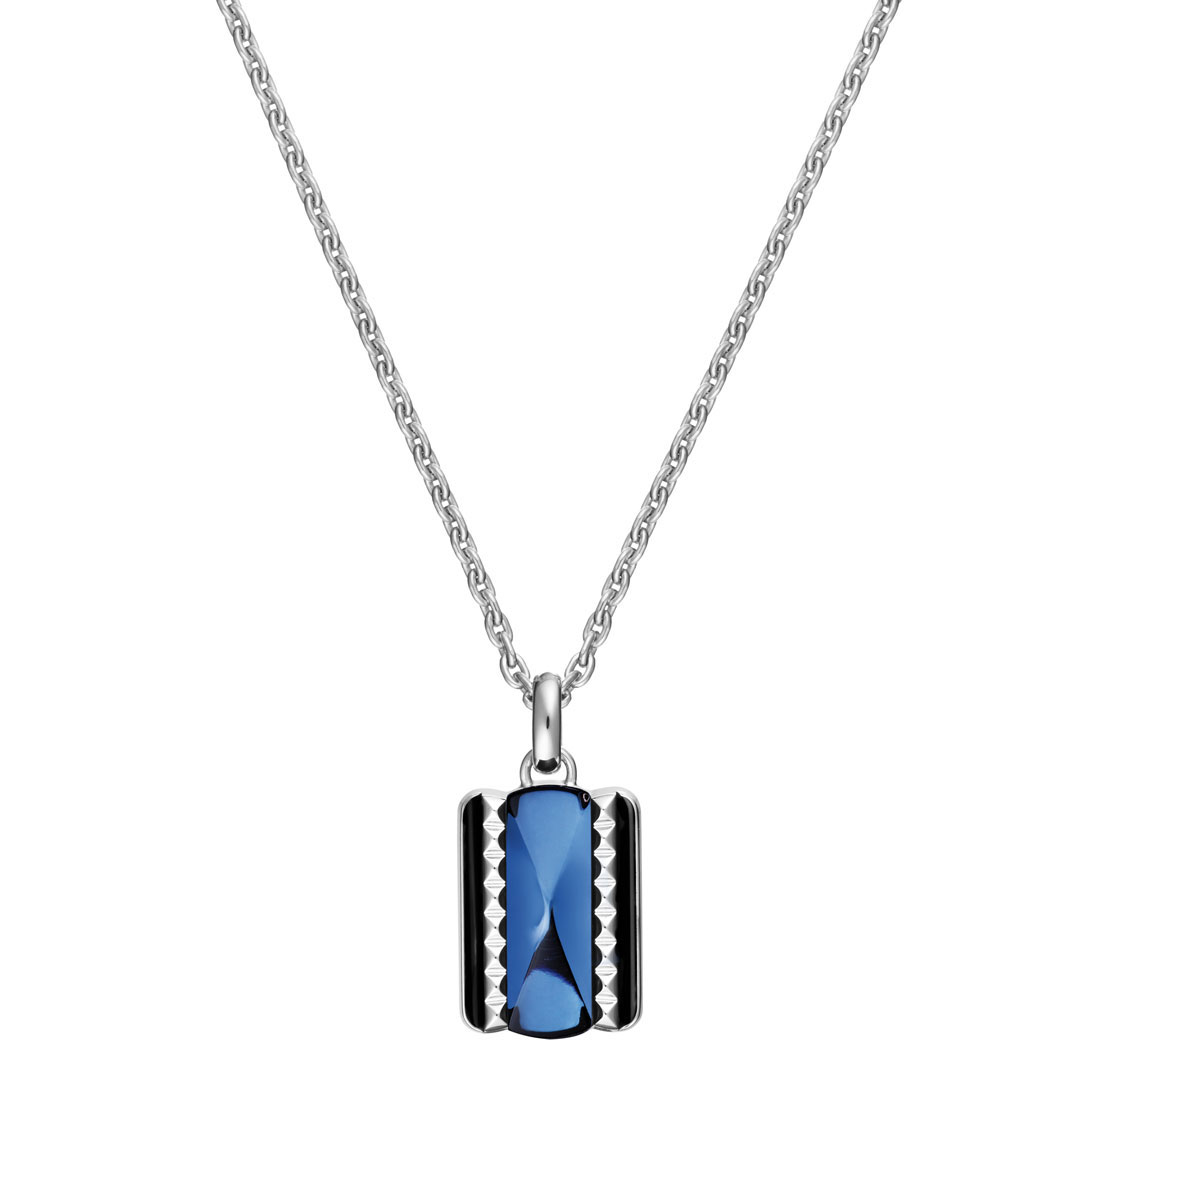 Baccarat Crystal Louxor Necklace, Silver and Blue Mordore